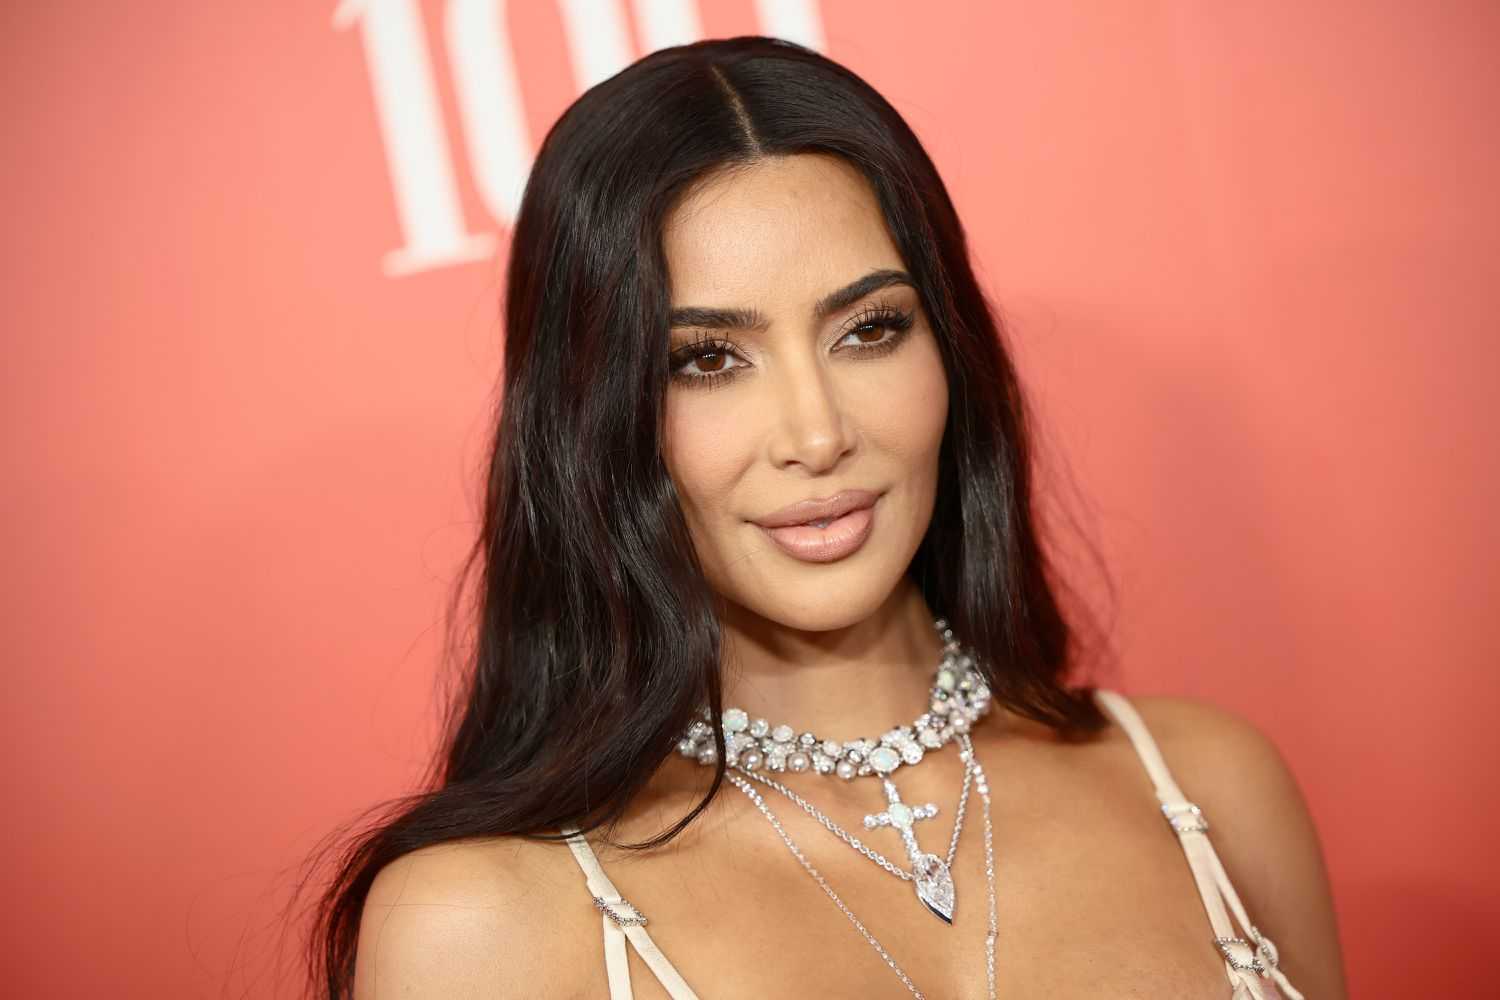 Kim Kardashian to follow up American Horror Story role with a new legal drama